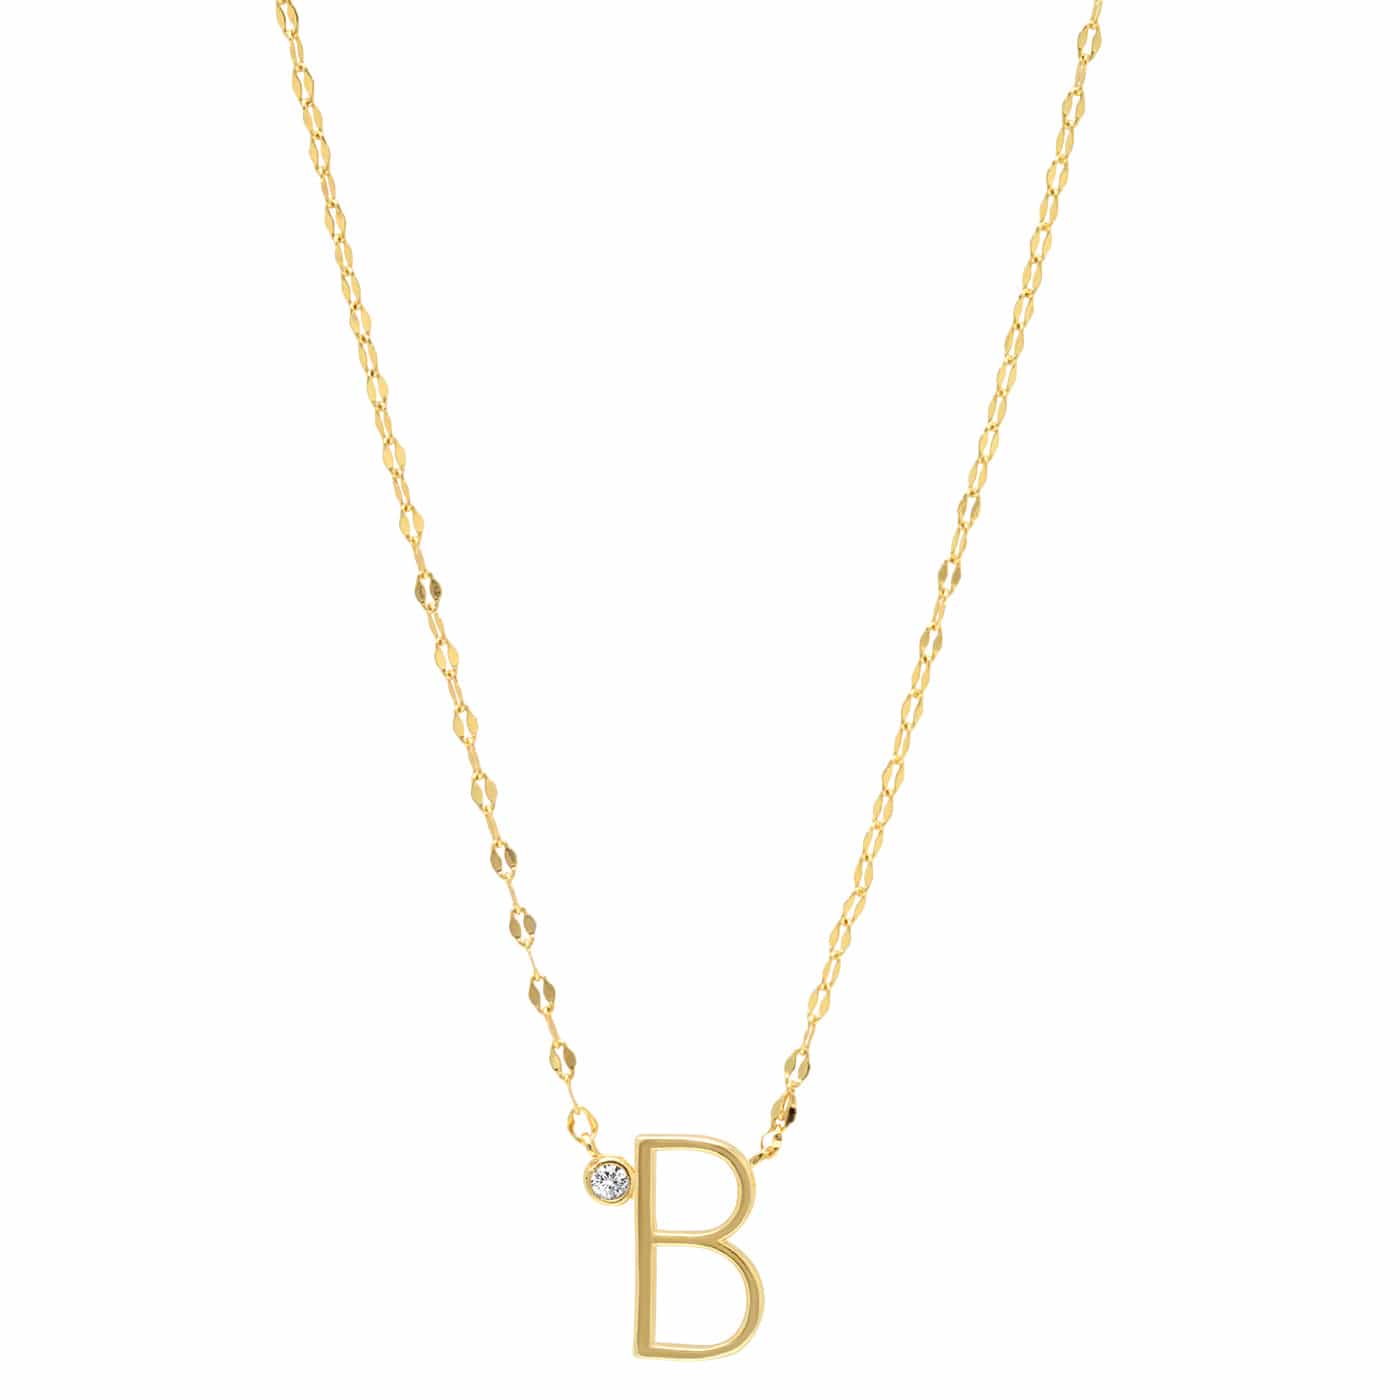 TAI JEWELRY Necklace B Medium Sized Initial Necklace With Cz Accent